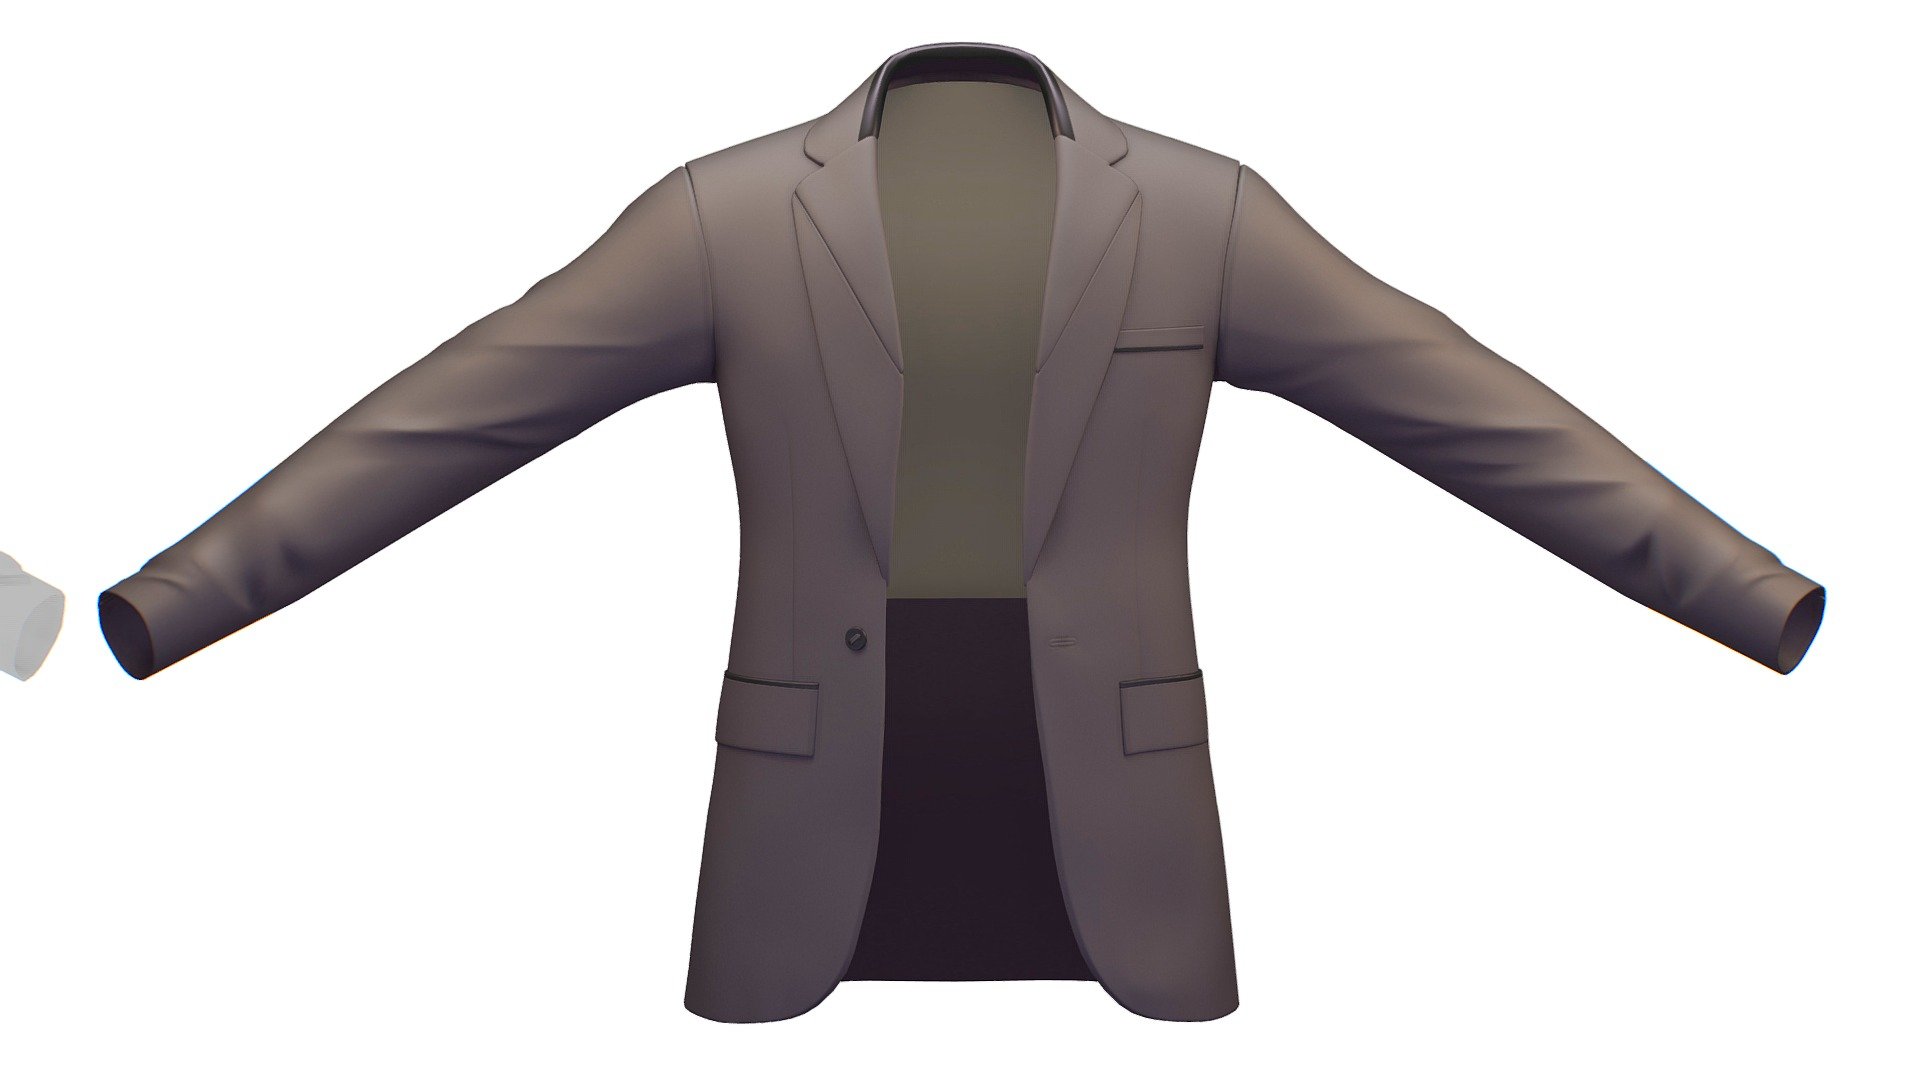 Cartoon High Poly Subdivision Gray Jacket

No HDRI map, No Light, No material settings - only Diffuse/Color Map Texture (2700x2700) 

More information about the 3D model: please use the Sketchfab Model Inspector - Key (i) - Cartoon High Poly Subdivision Gray Jacket - Buy Royalty Free 3D model by Oleg Shuldiakov (@olegshuldiakov) 3d model